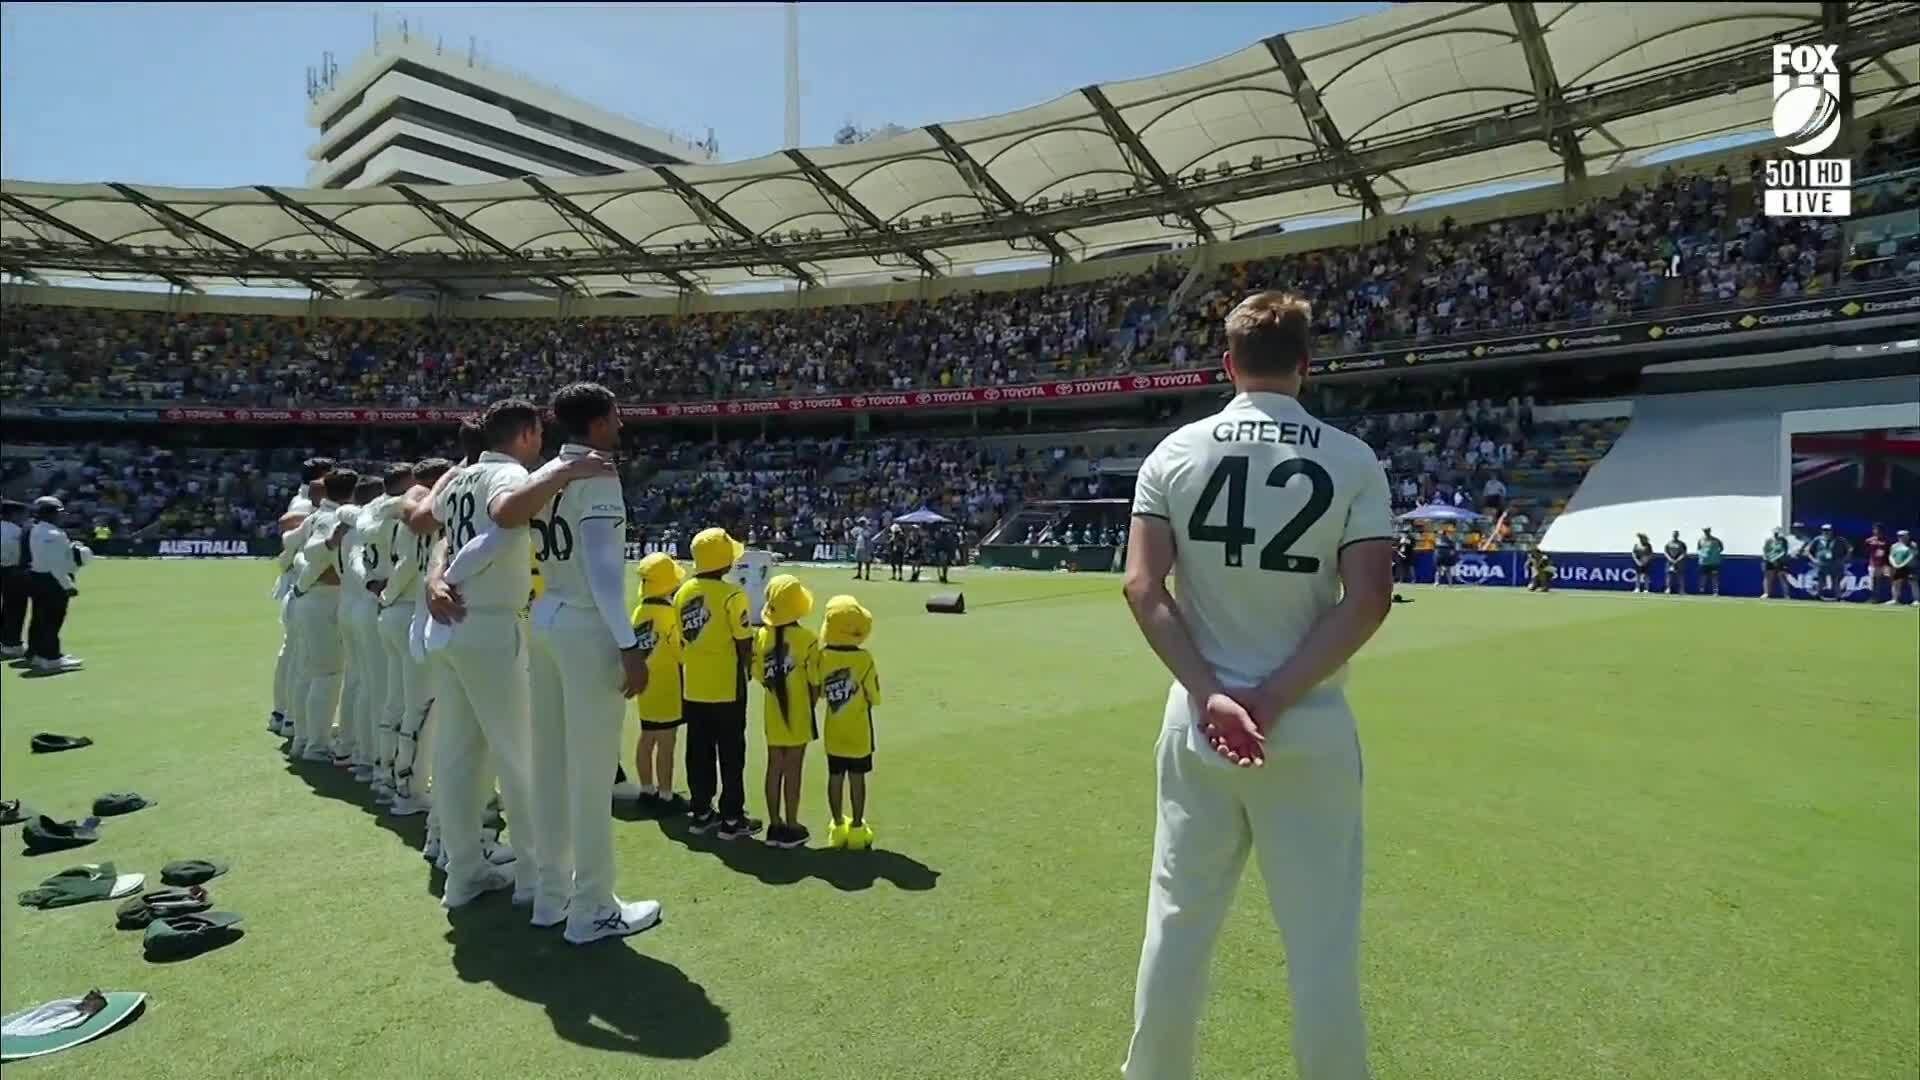 Cameron Green standing away from his teammates. (Image Credits: Twitter)